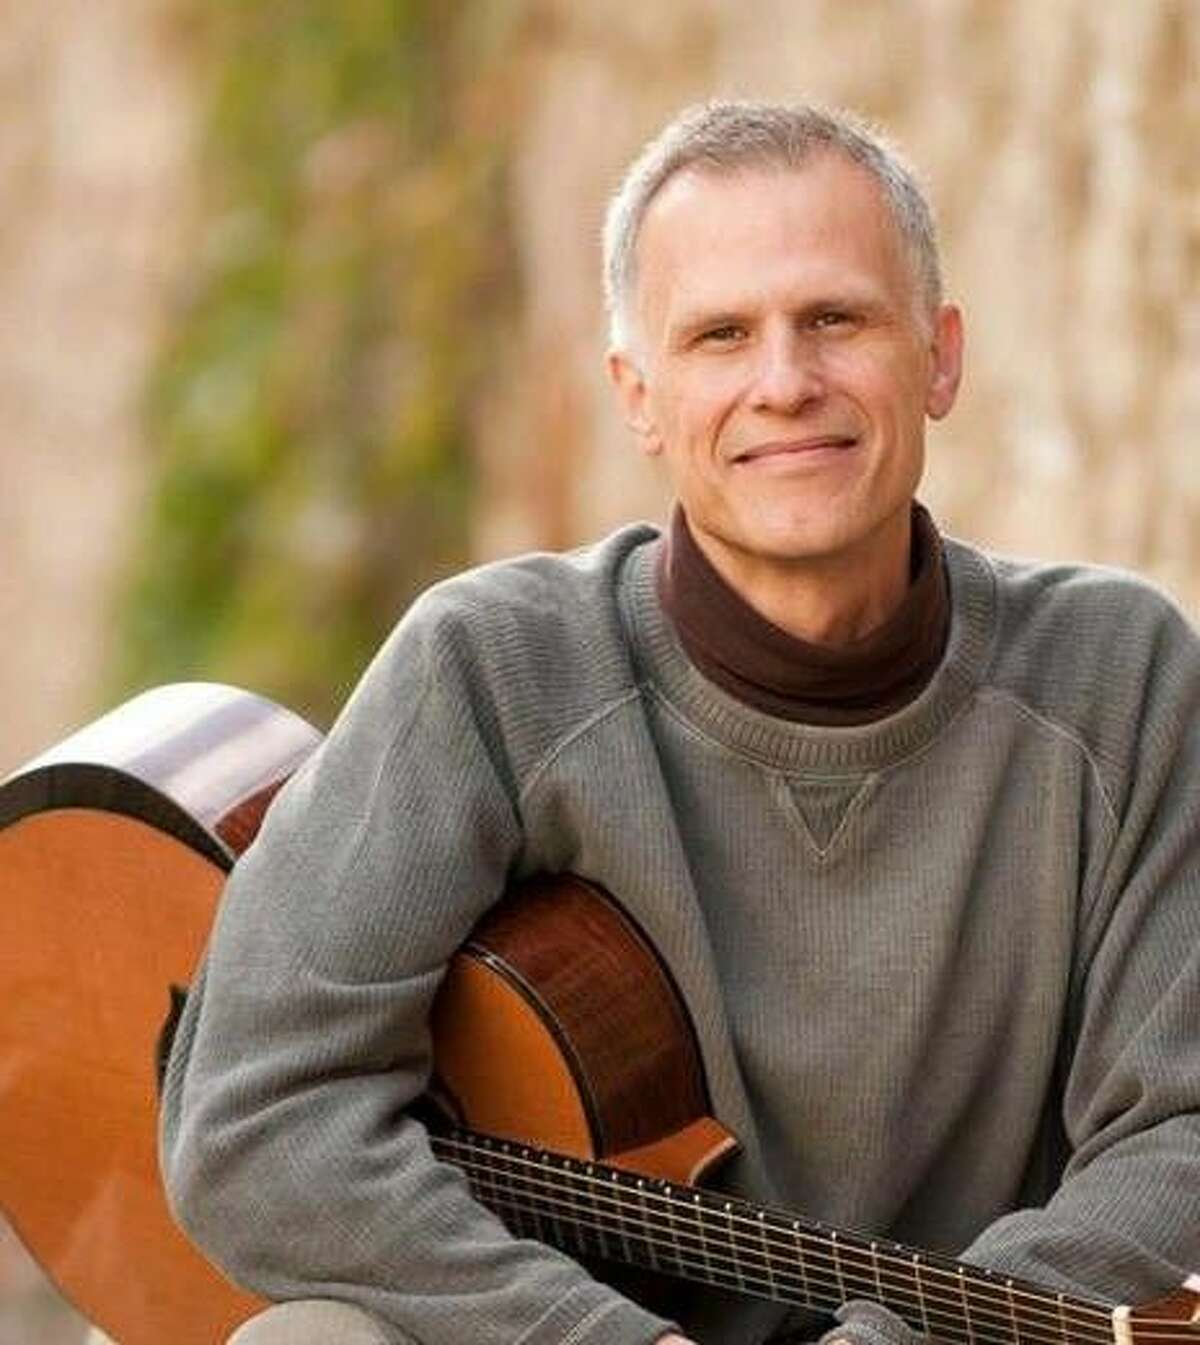 Peter Mayer will perform at Millbend Coffeehouse in The Woodlands Saturday at 7:30 p.m.